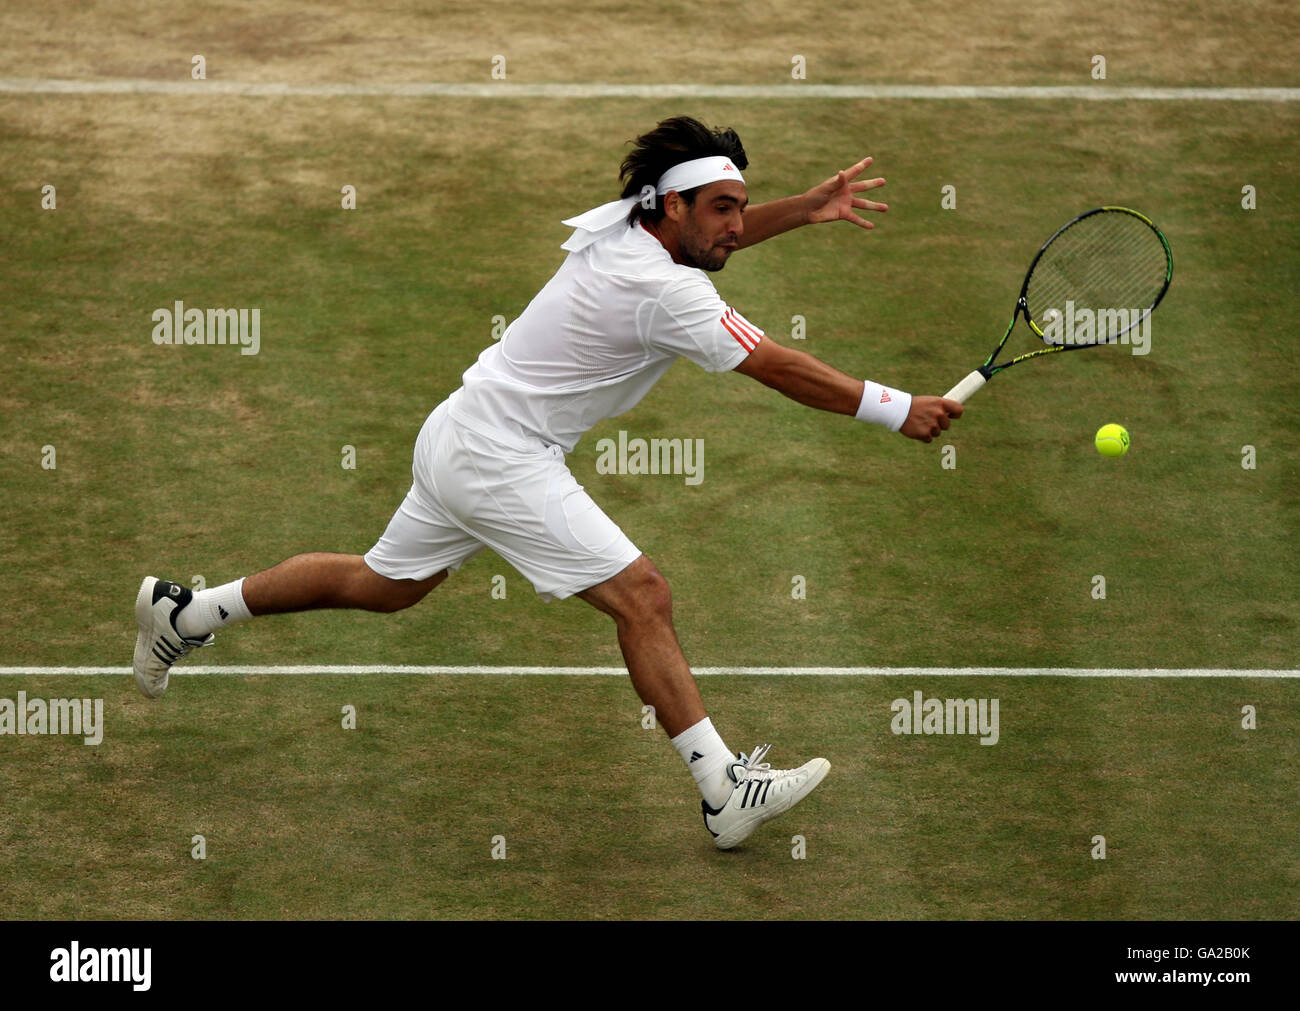 Tennis - Wimbledon Championships 2007 - Day Eleven - All England Club. Marcos Baghdatis in action against Novak Djokovic Stock Photo